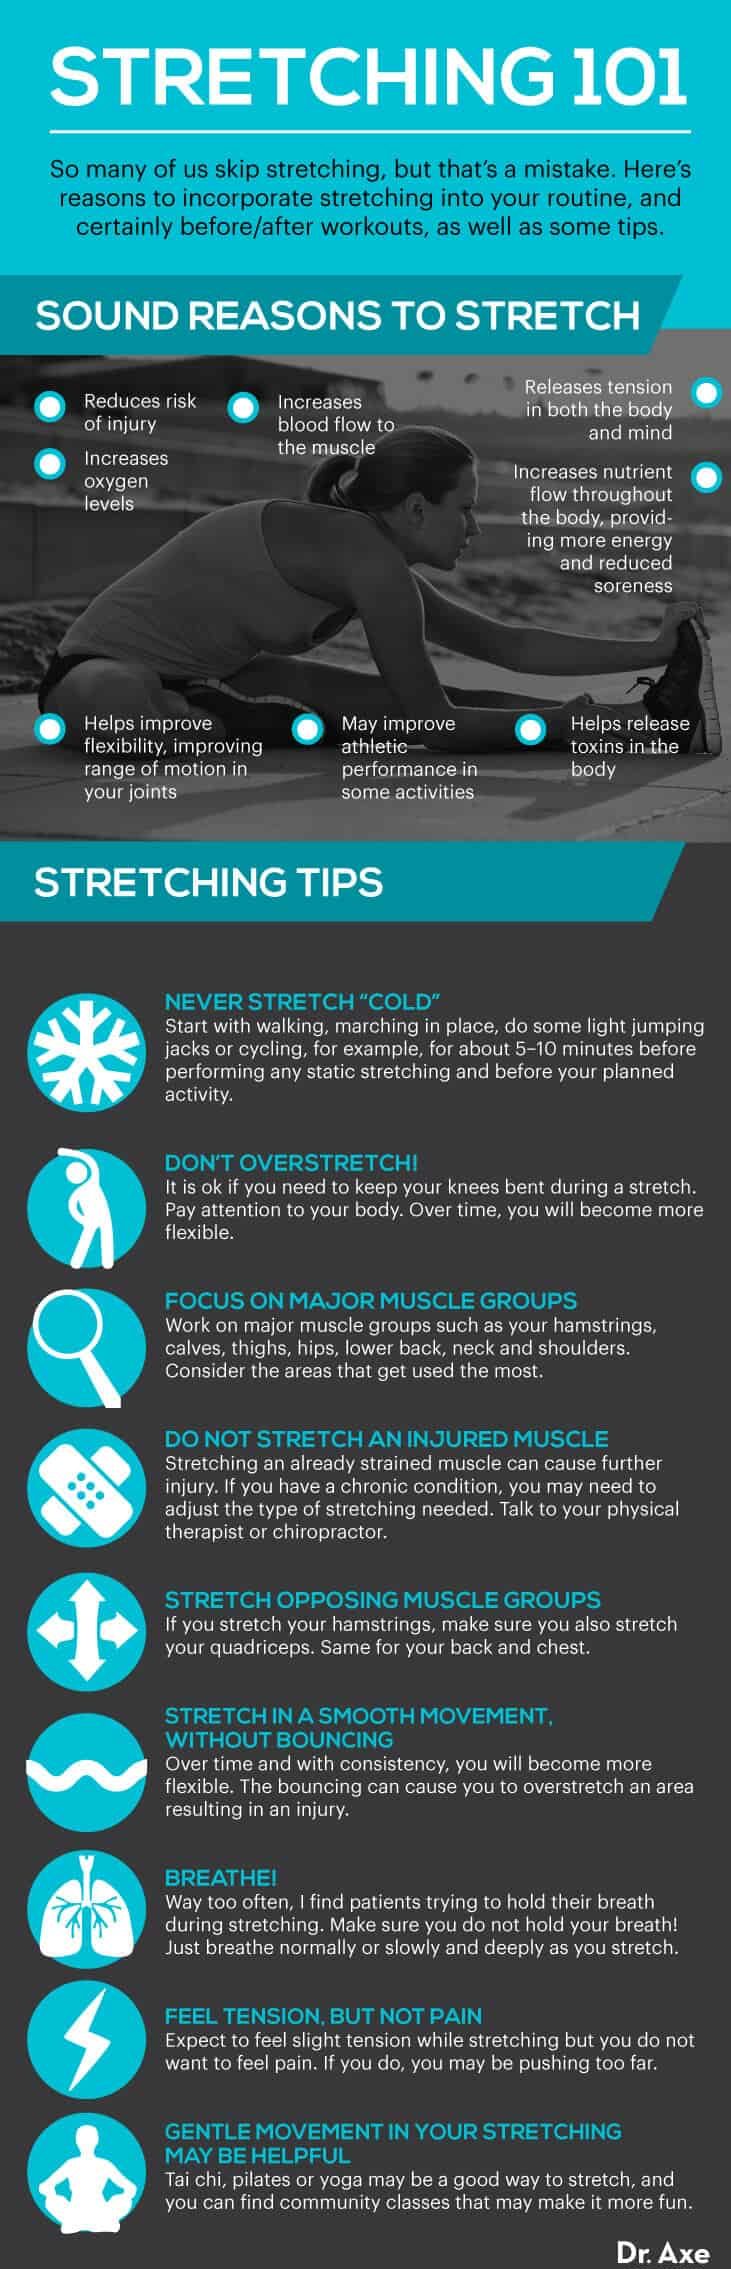 Stretching tips - Dr. Axe